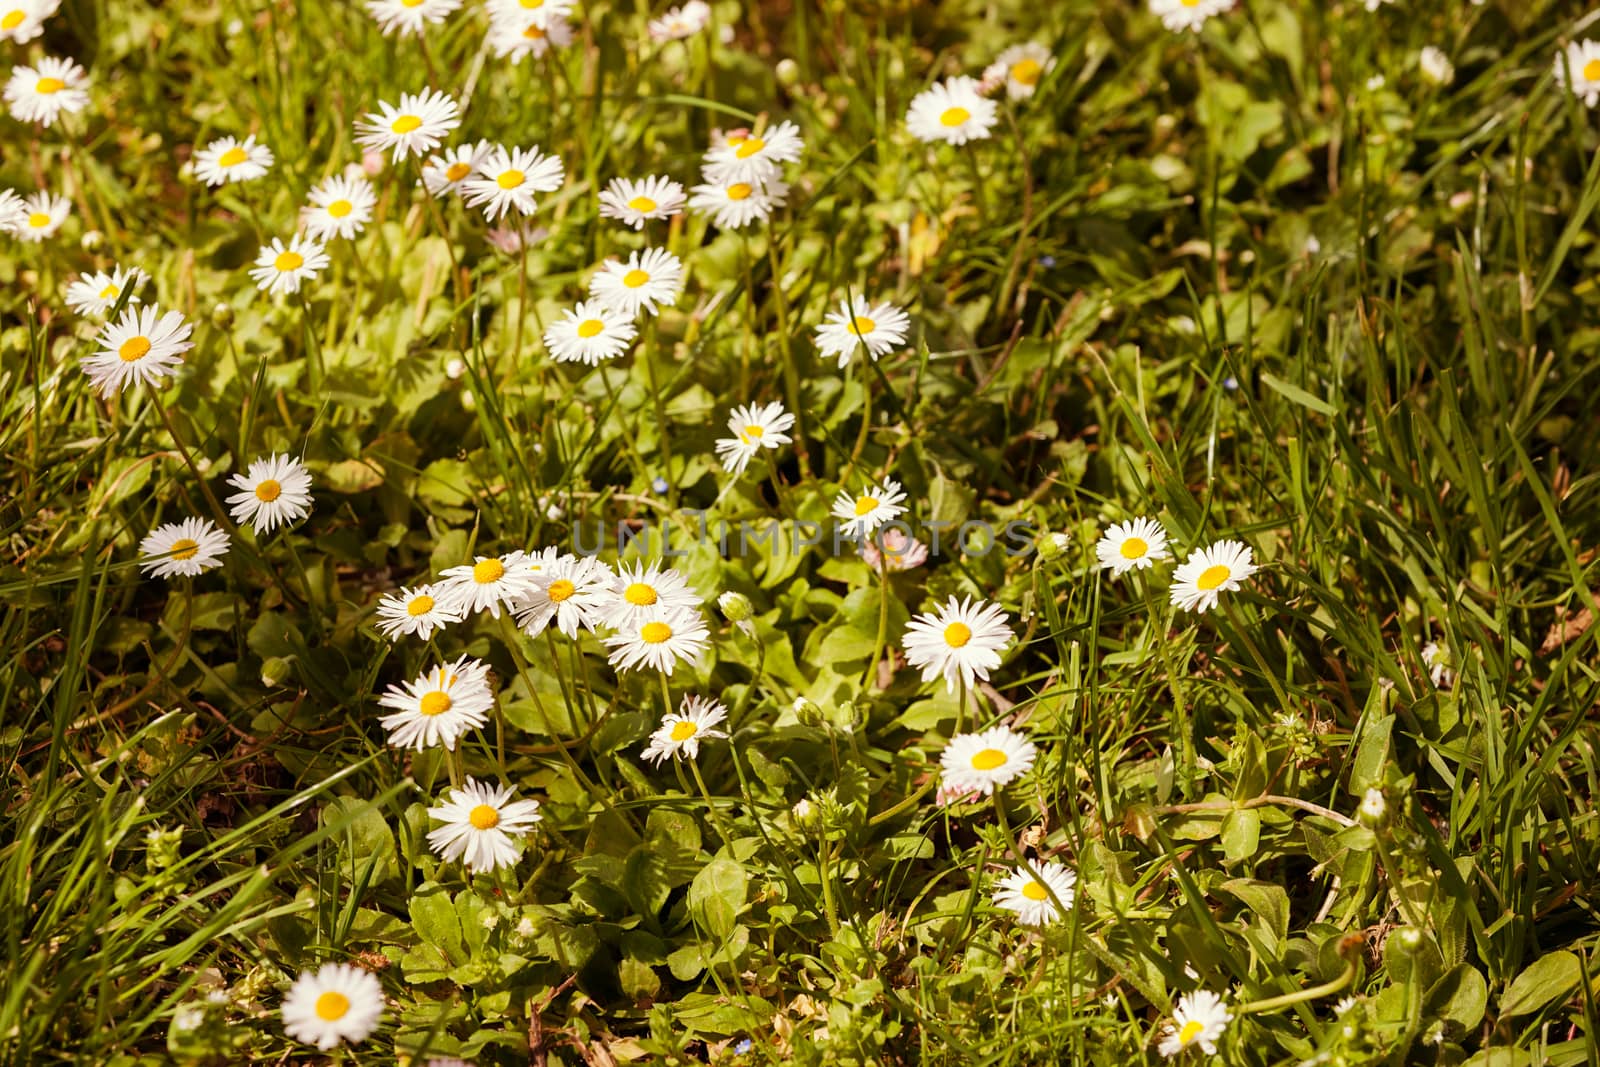 daisies in the grass by vladimirnenezic